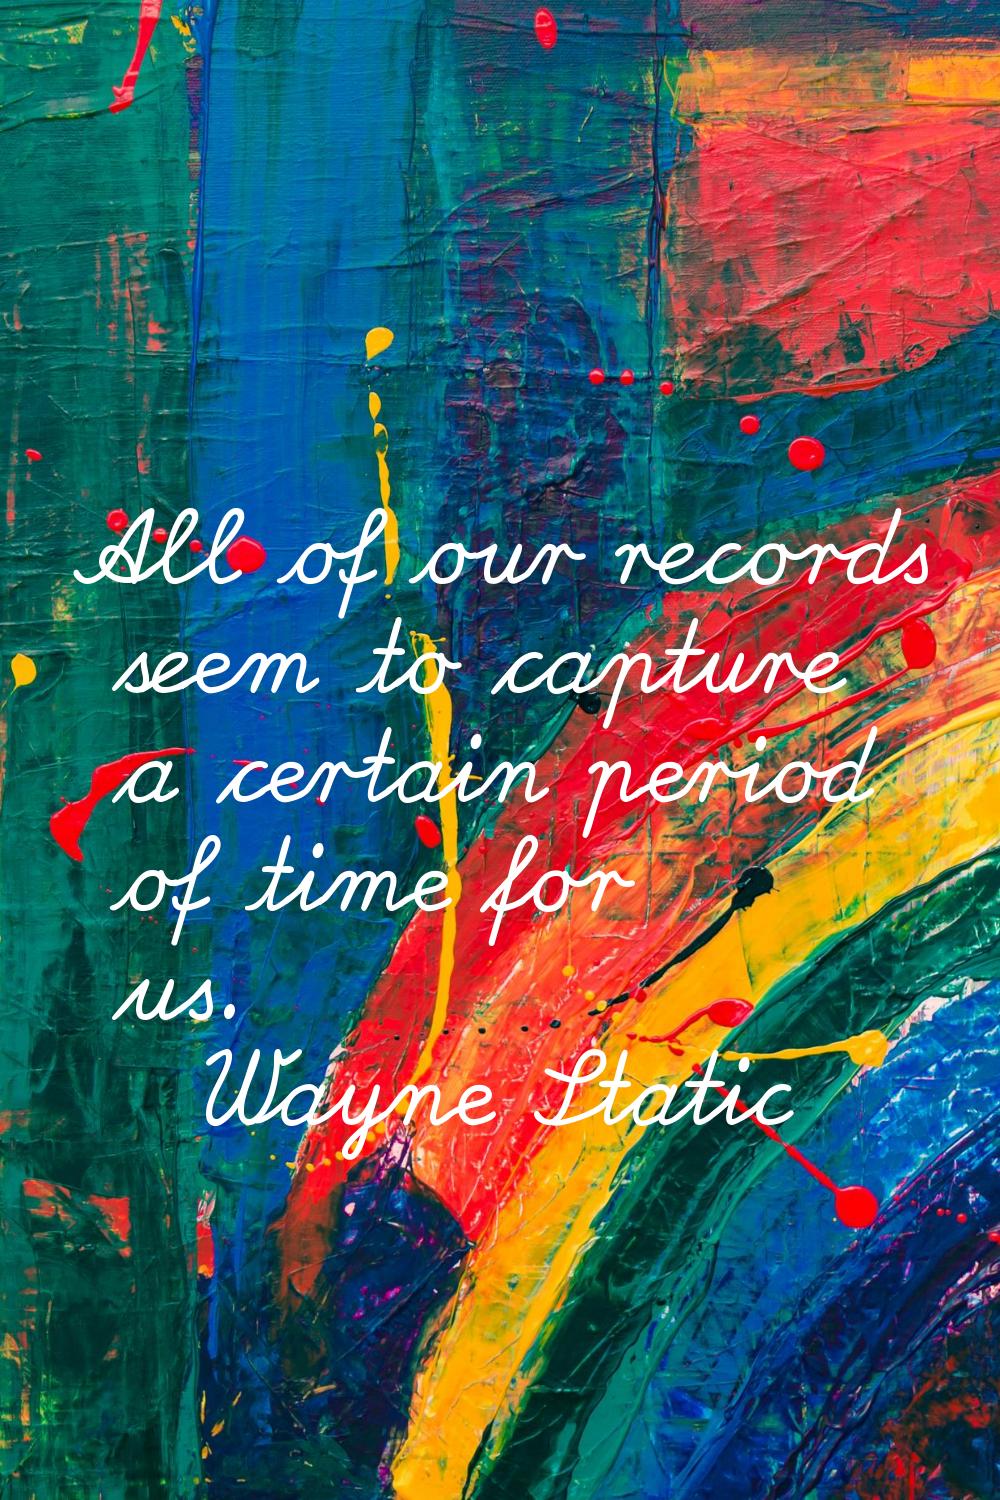 All of our records seem to capture a certain period of time for us.